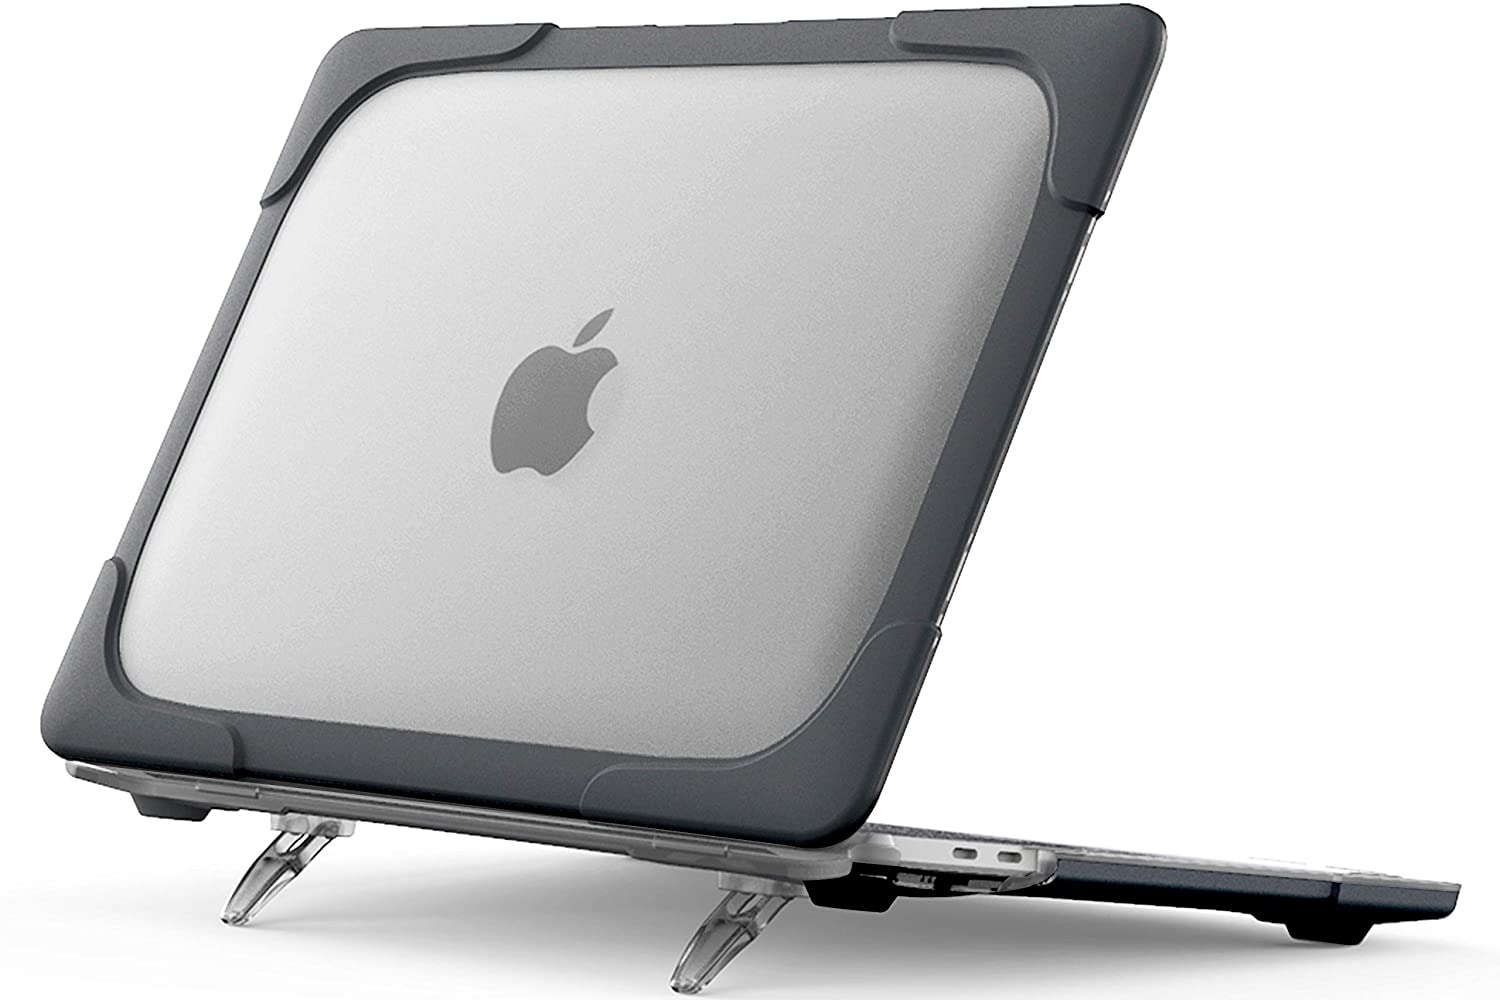 the best cover for mac book pro